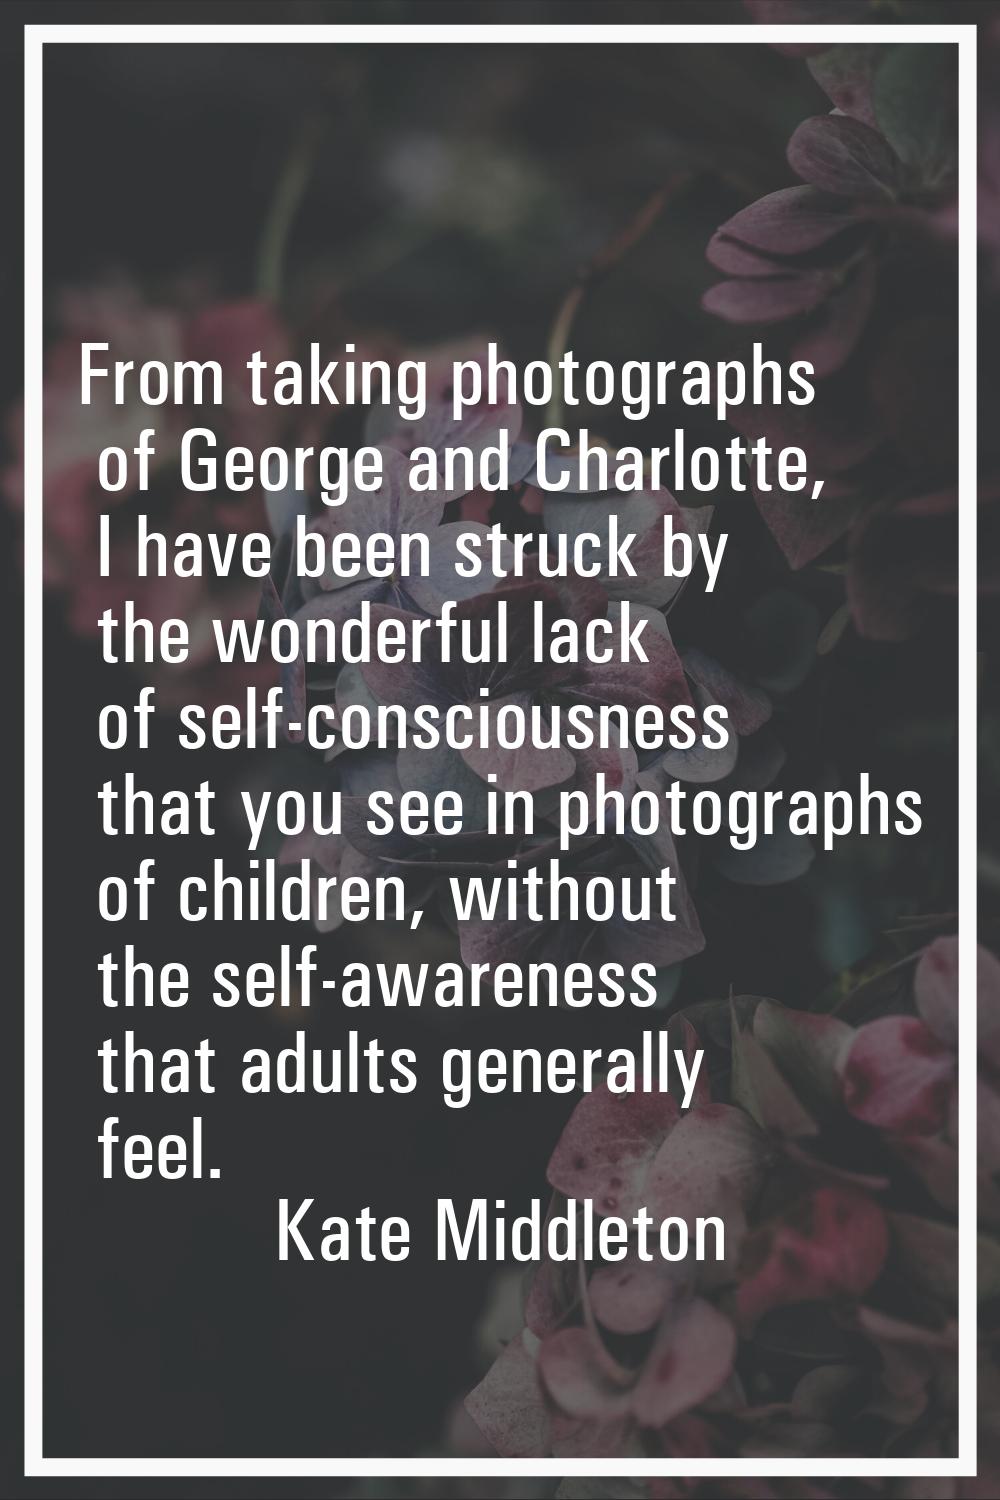 From taking photographs of George and Charlotte, I have been struck by the wonderful lack of self-c